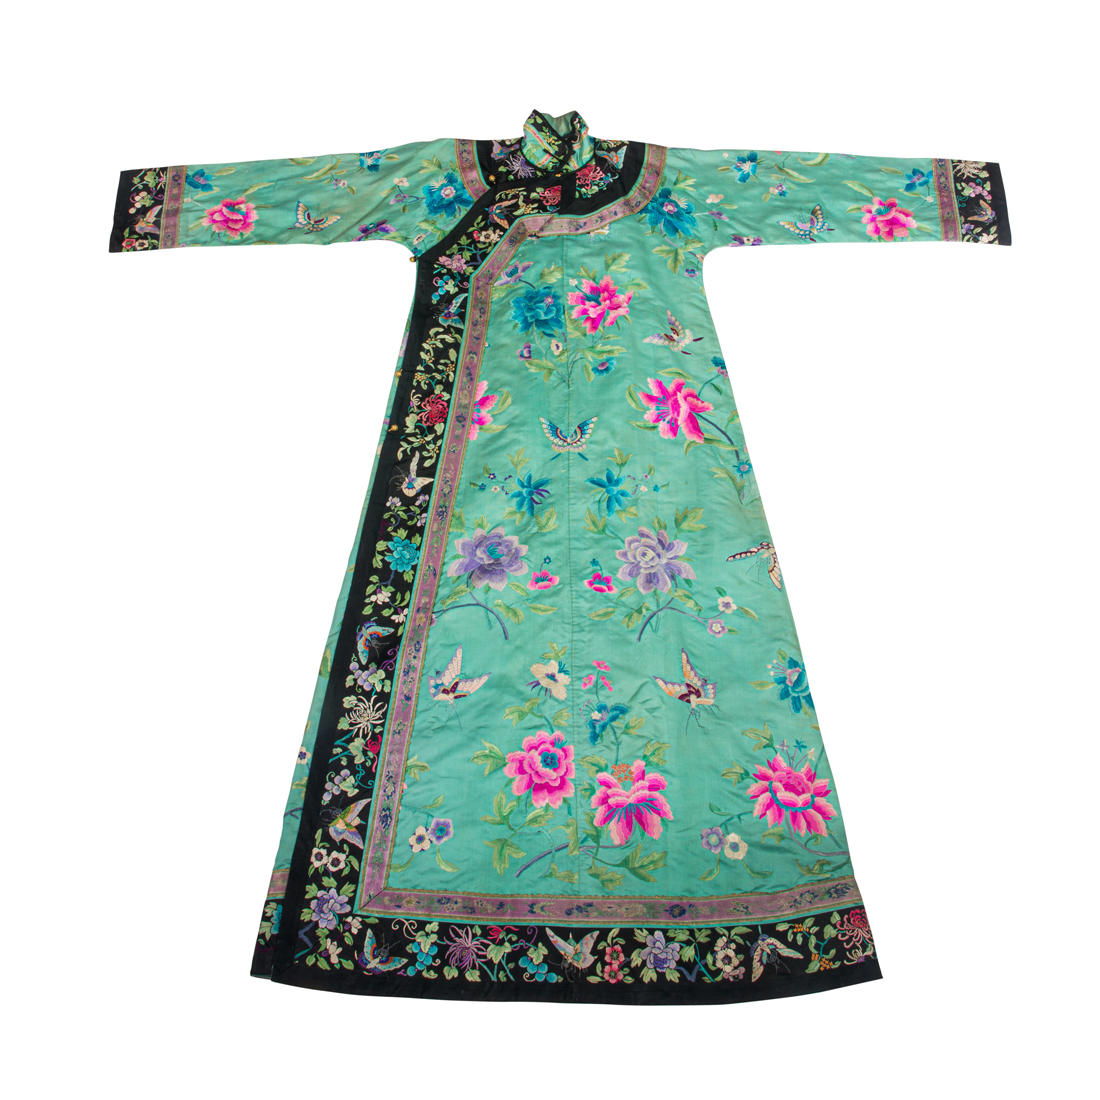 A CHINESE EMBROIDERED LADY S TURQUOISE GROUND 3a0f36